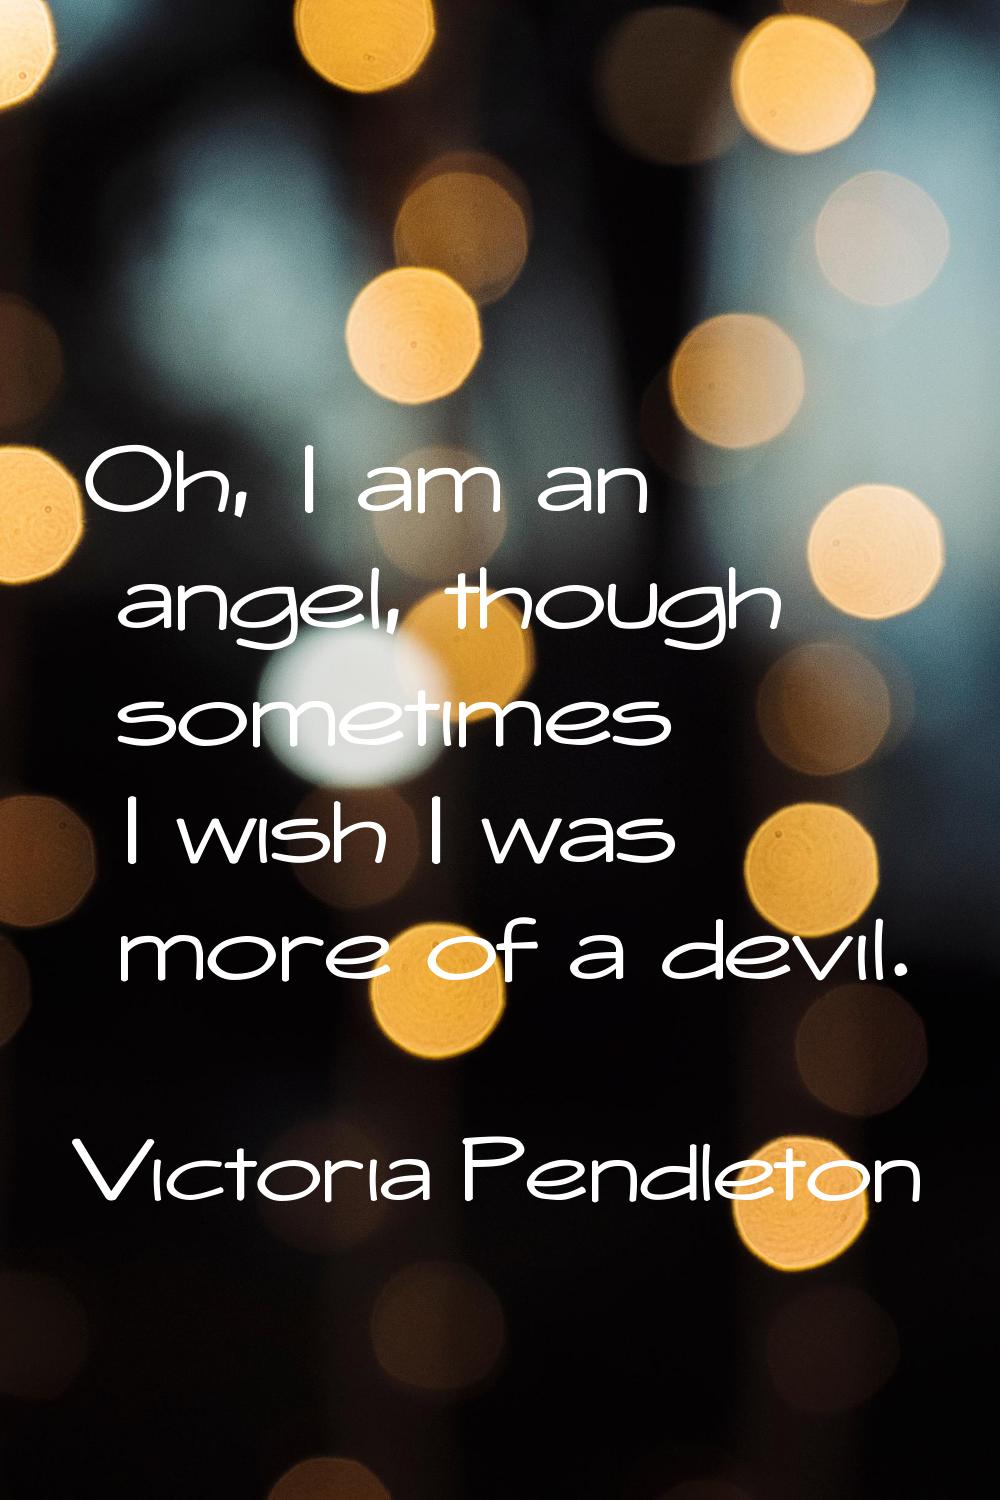 Oh, I am an angel, though sometimes I wish I was more of a devil.